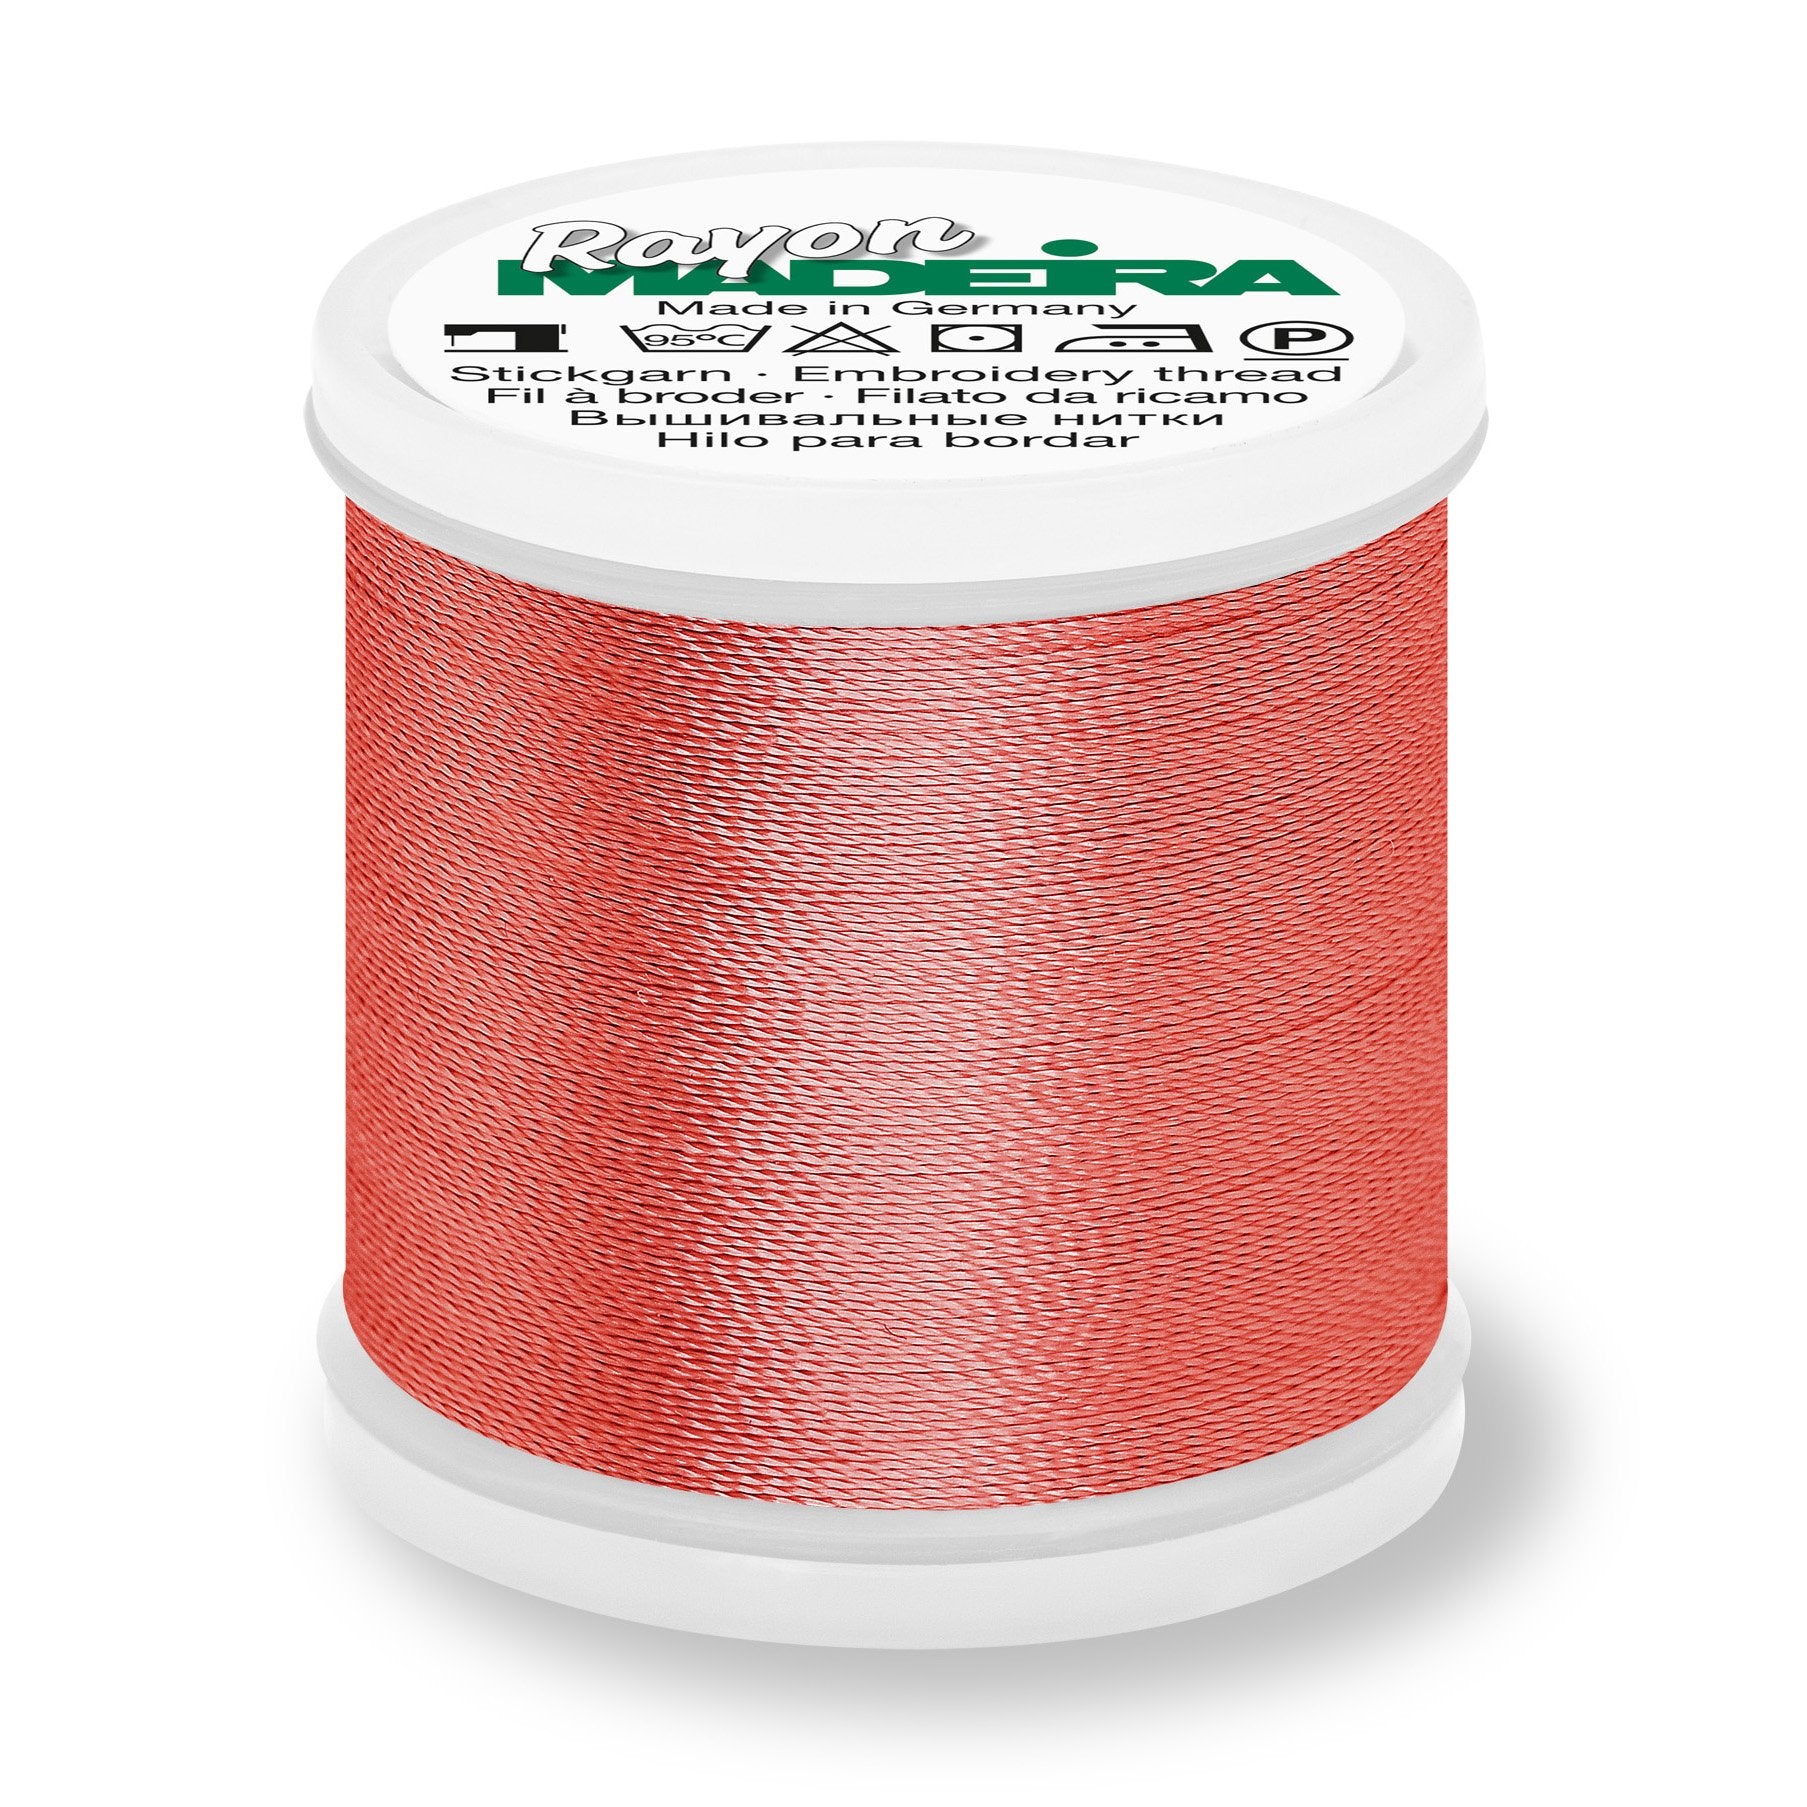 Madeira Rayon 40 Embroidery Thread 200m #1379 Red Orange from Jaycotts Sewing Supplies